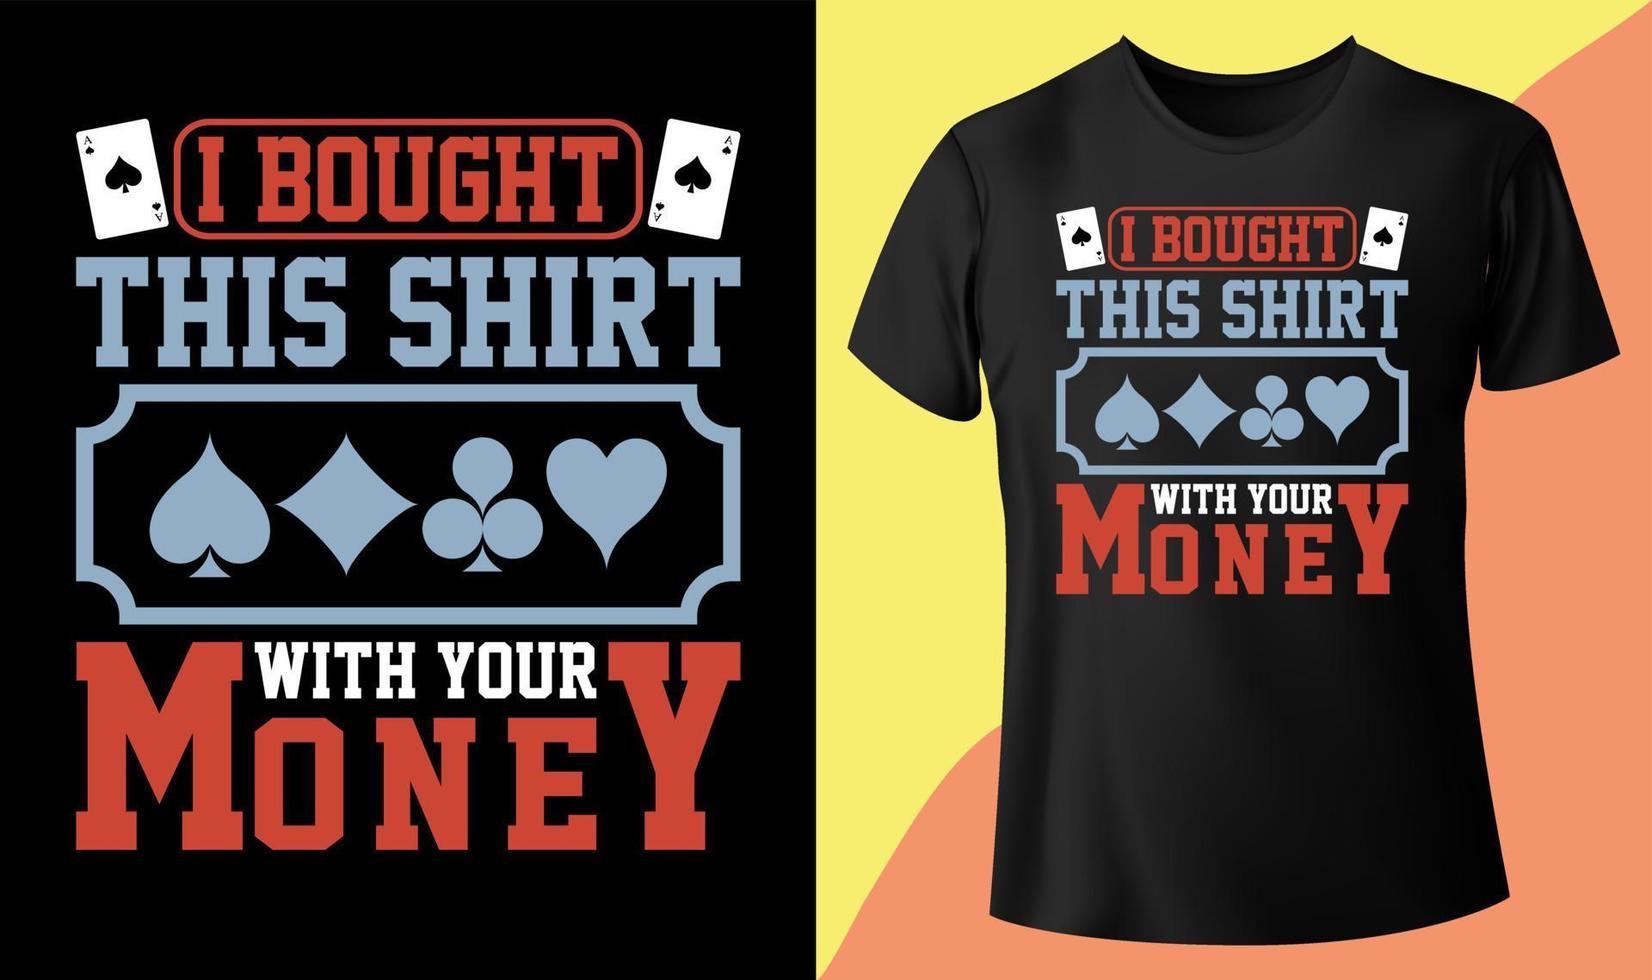 I bought this shirt with your money. Poker quotes t-shirt design vector illustration